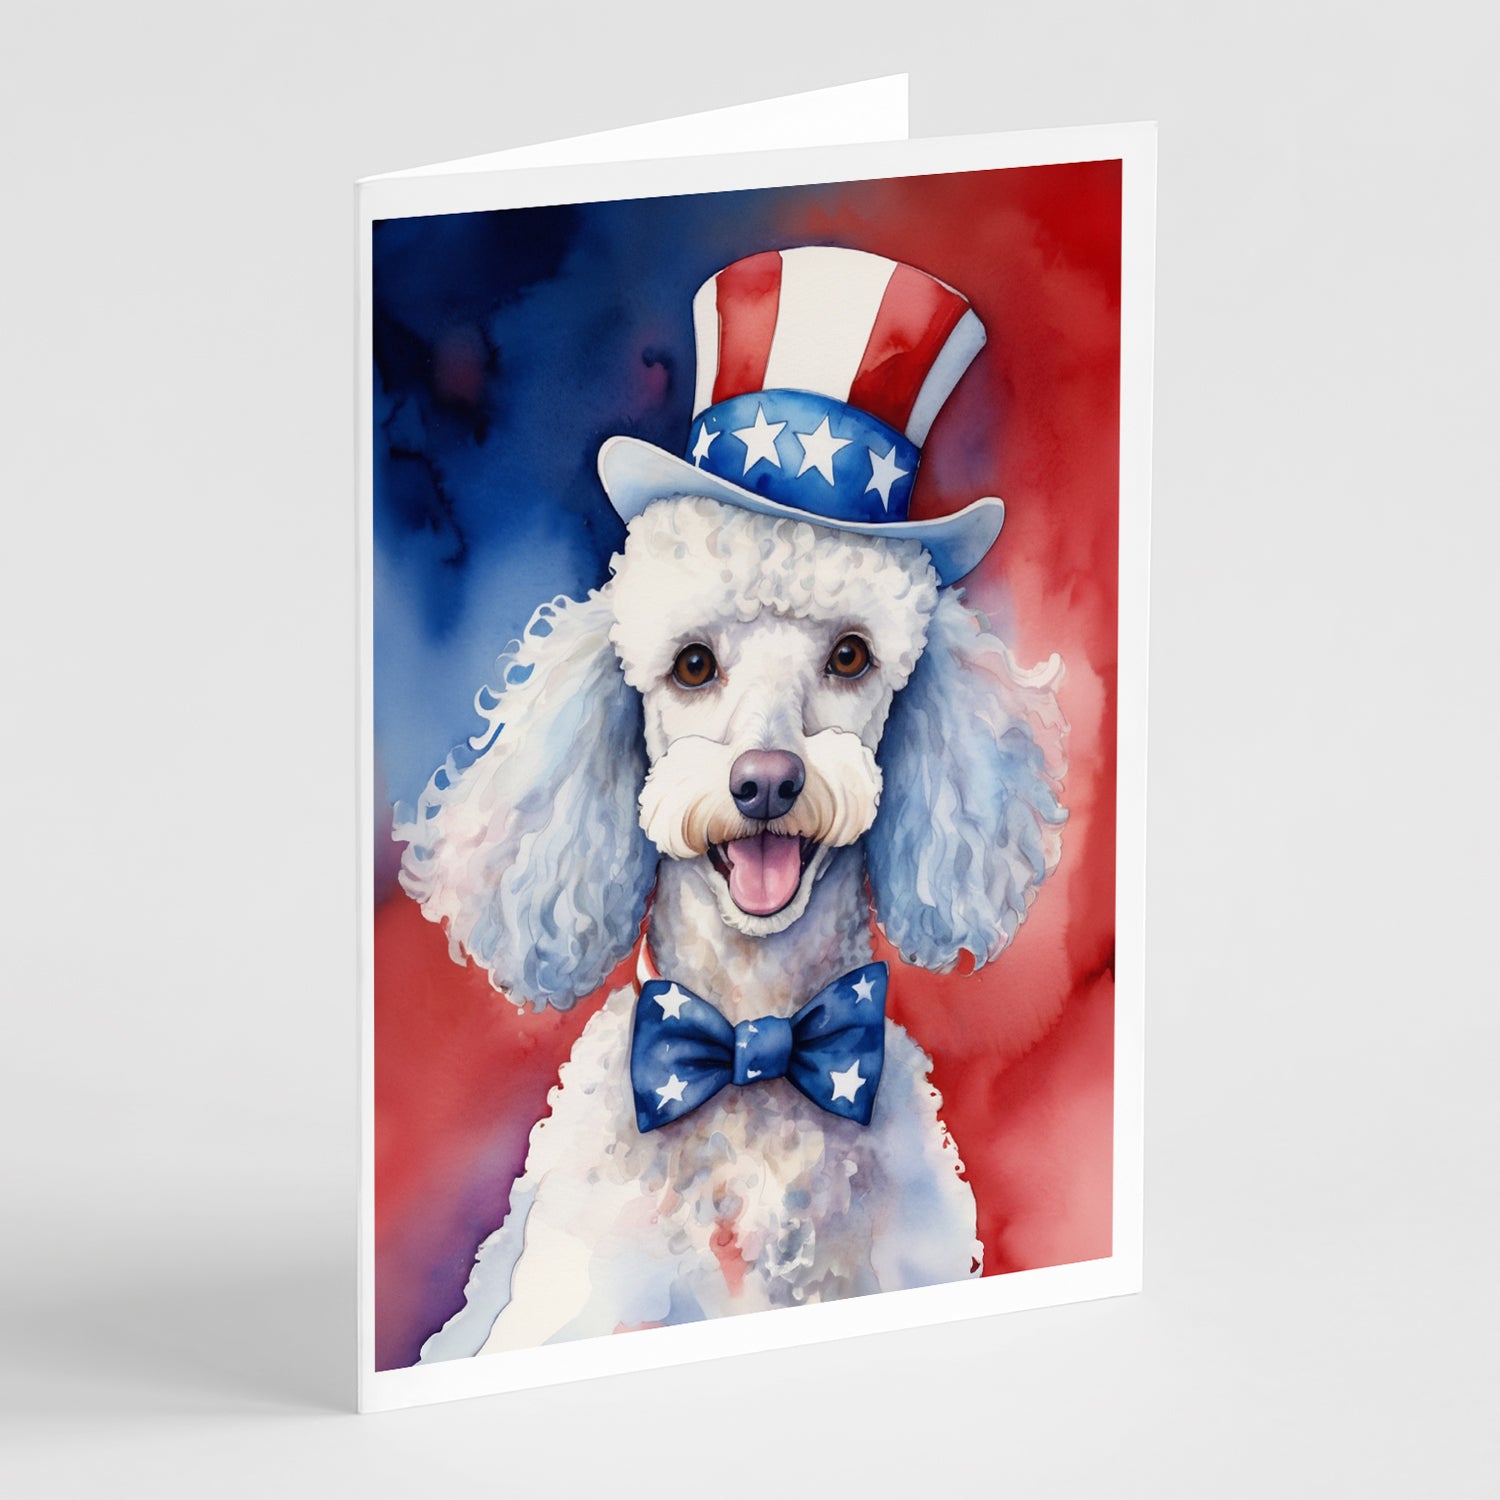 Buy this White Poodle Patriotic American Greeting Cards Pack of 8